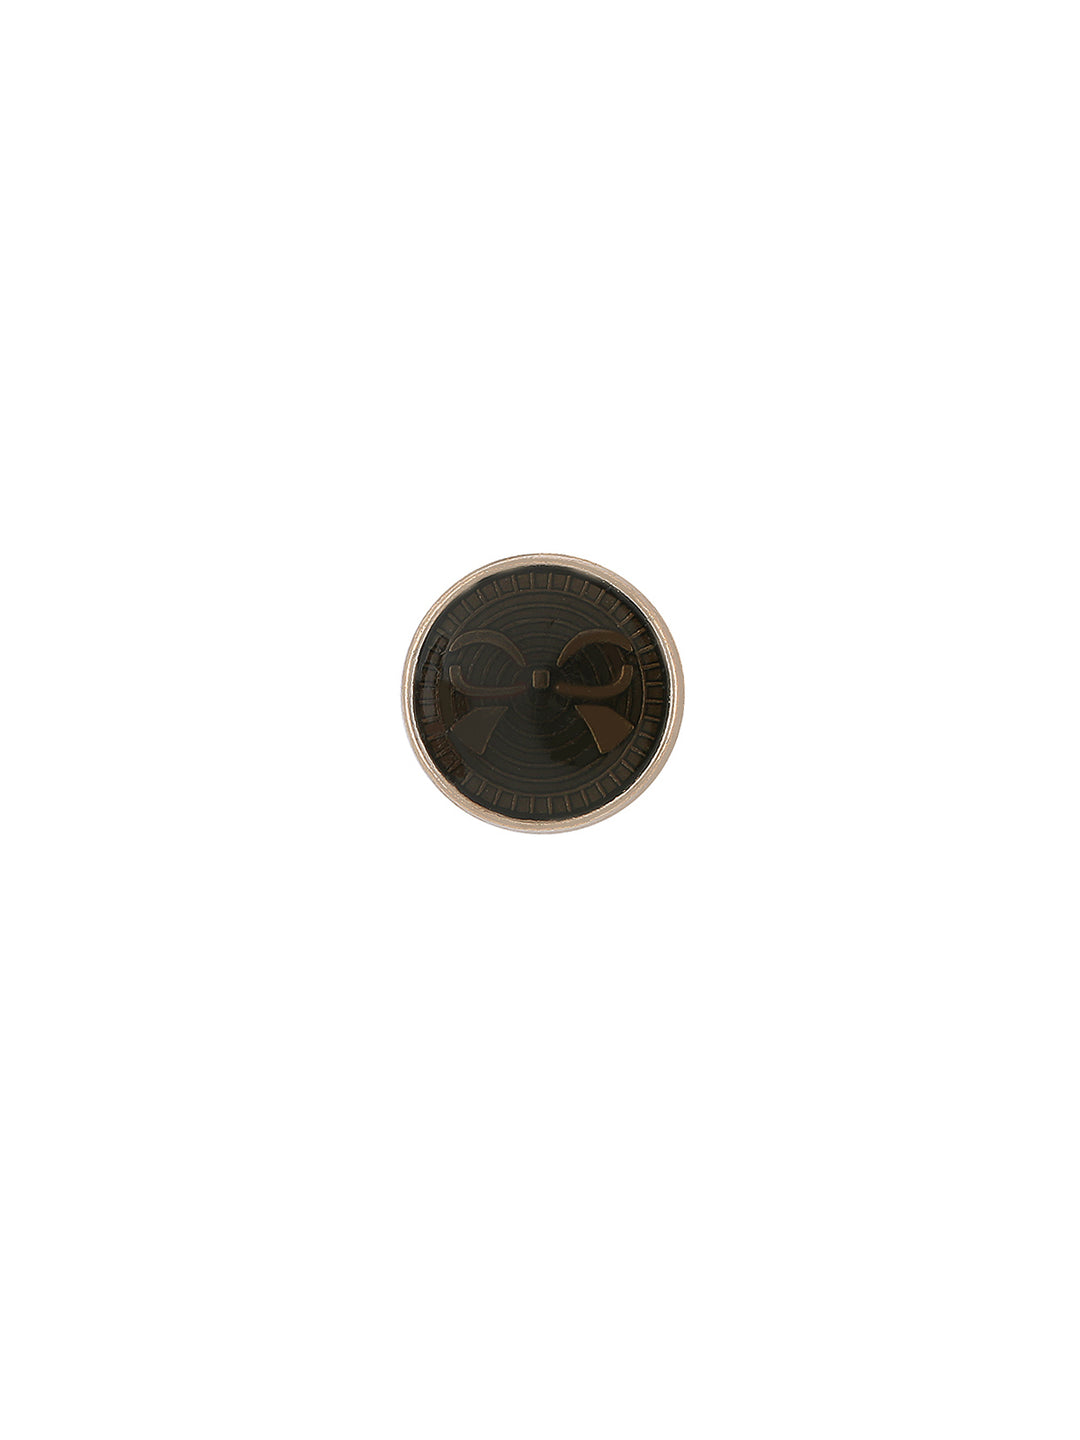 Classy Golden with Black Lamination Lucite Shank Button